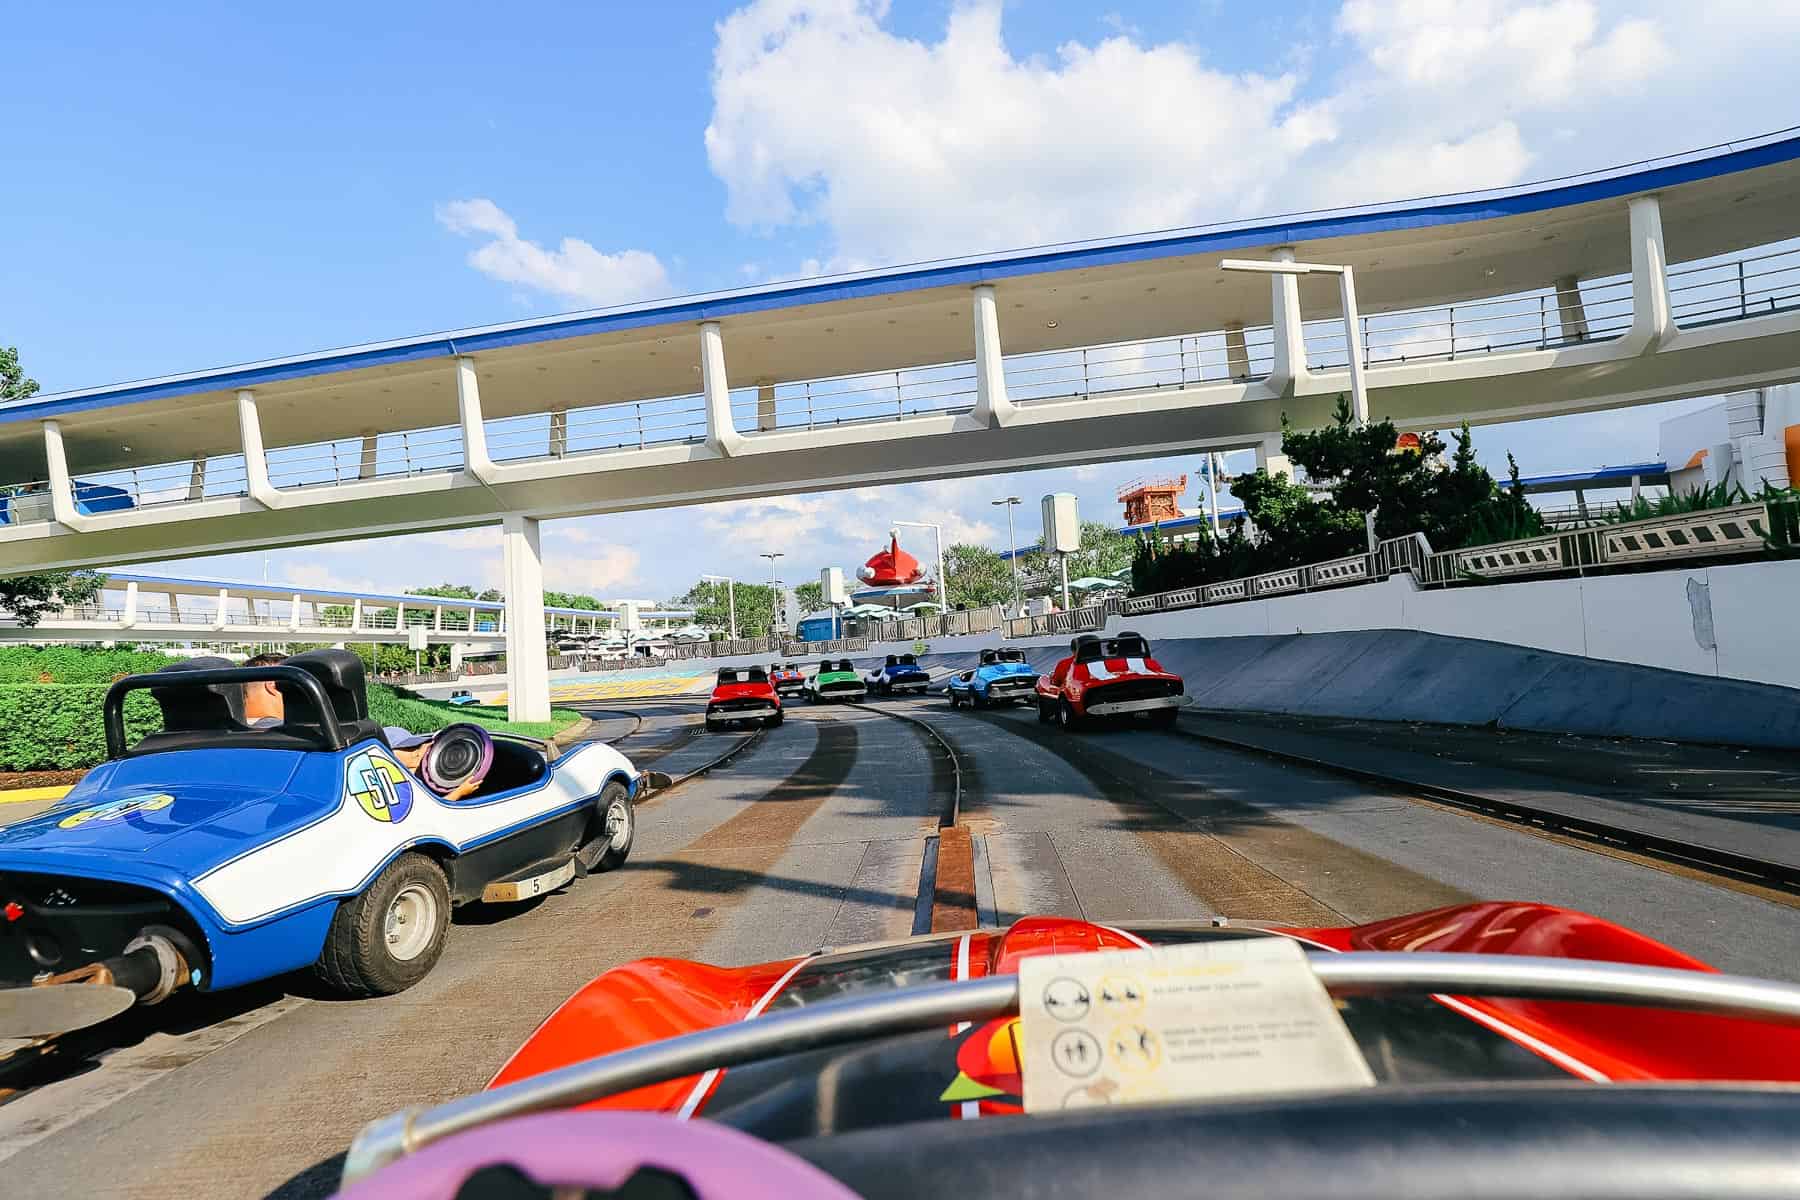 driving on the track under the Peoplemover 